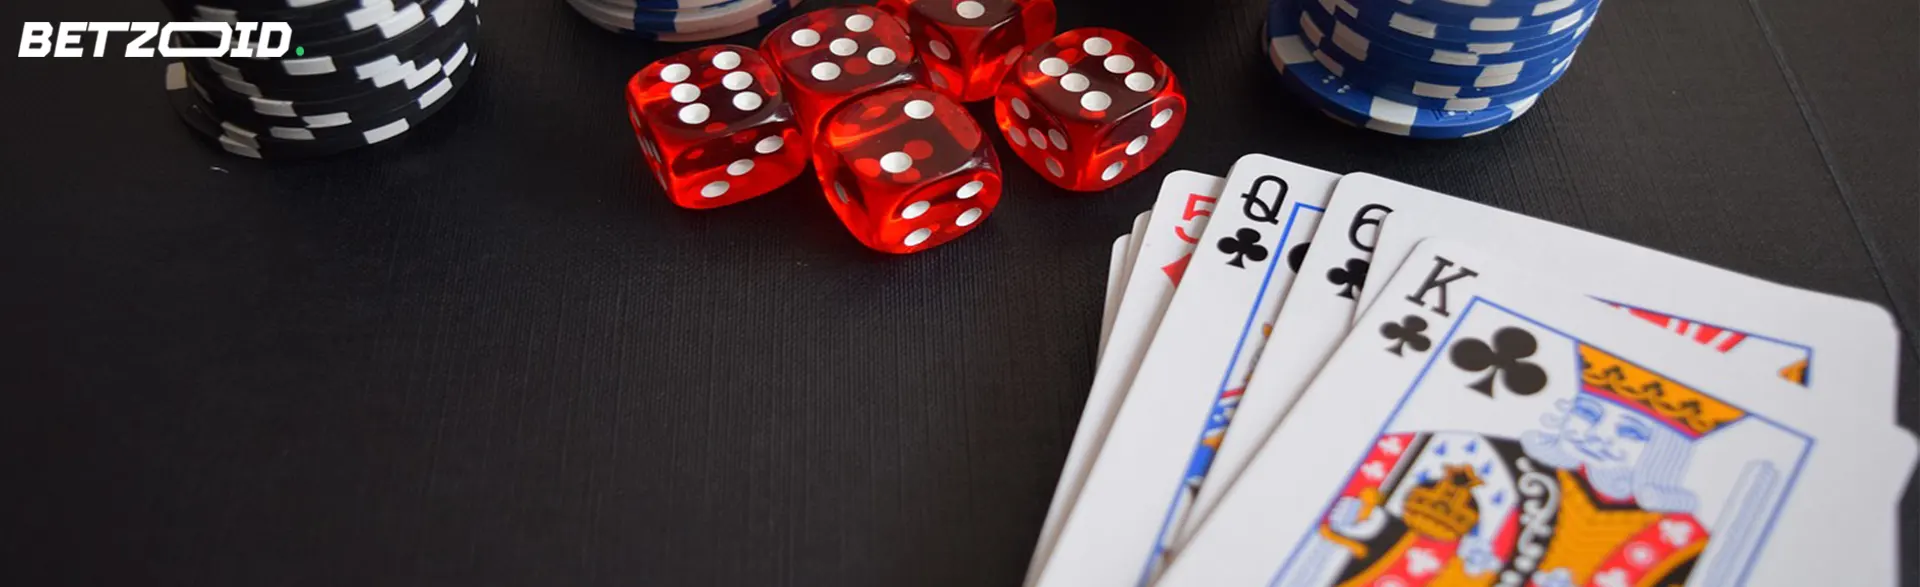 Casino chips, dice, and playing cards on a table, capturing the essence of high stakes betting sites.